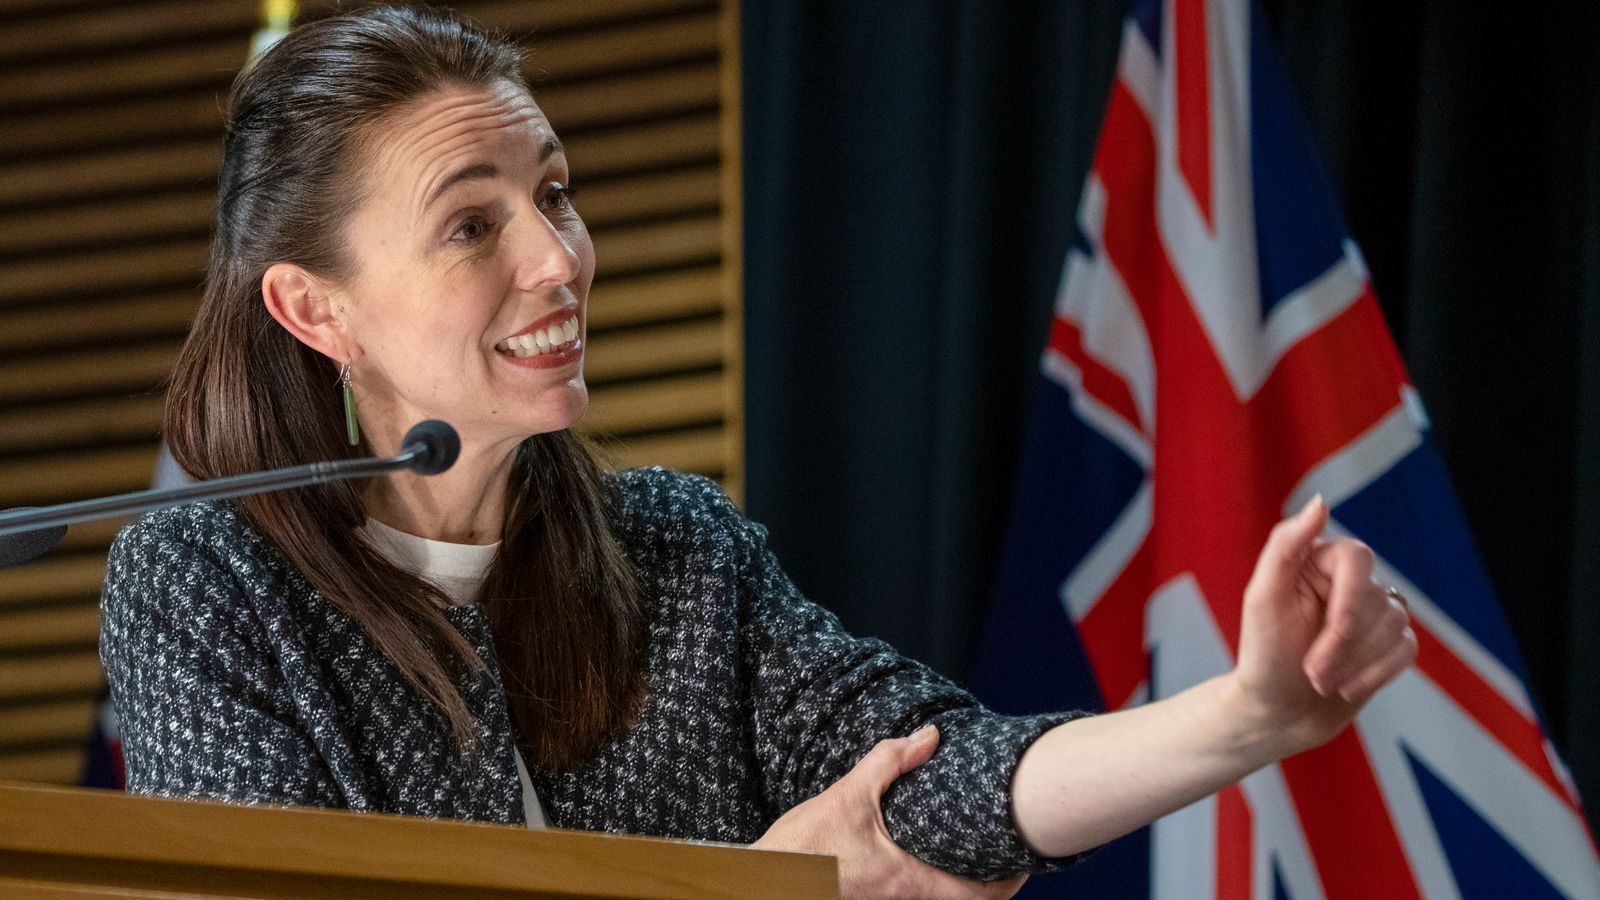 COVID-19: New Zealand's Prime Minister Jacinda Ardern postpones wedding as she places country under strict coronavirus restrictions - Sky News